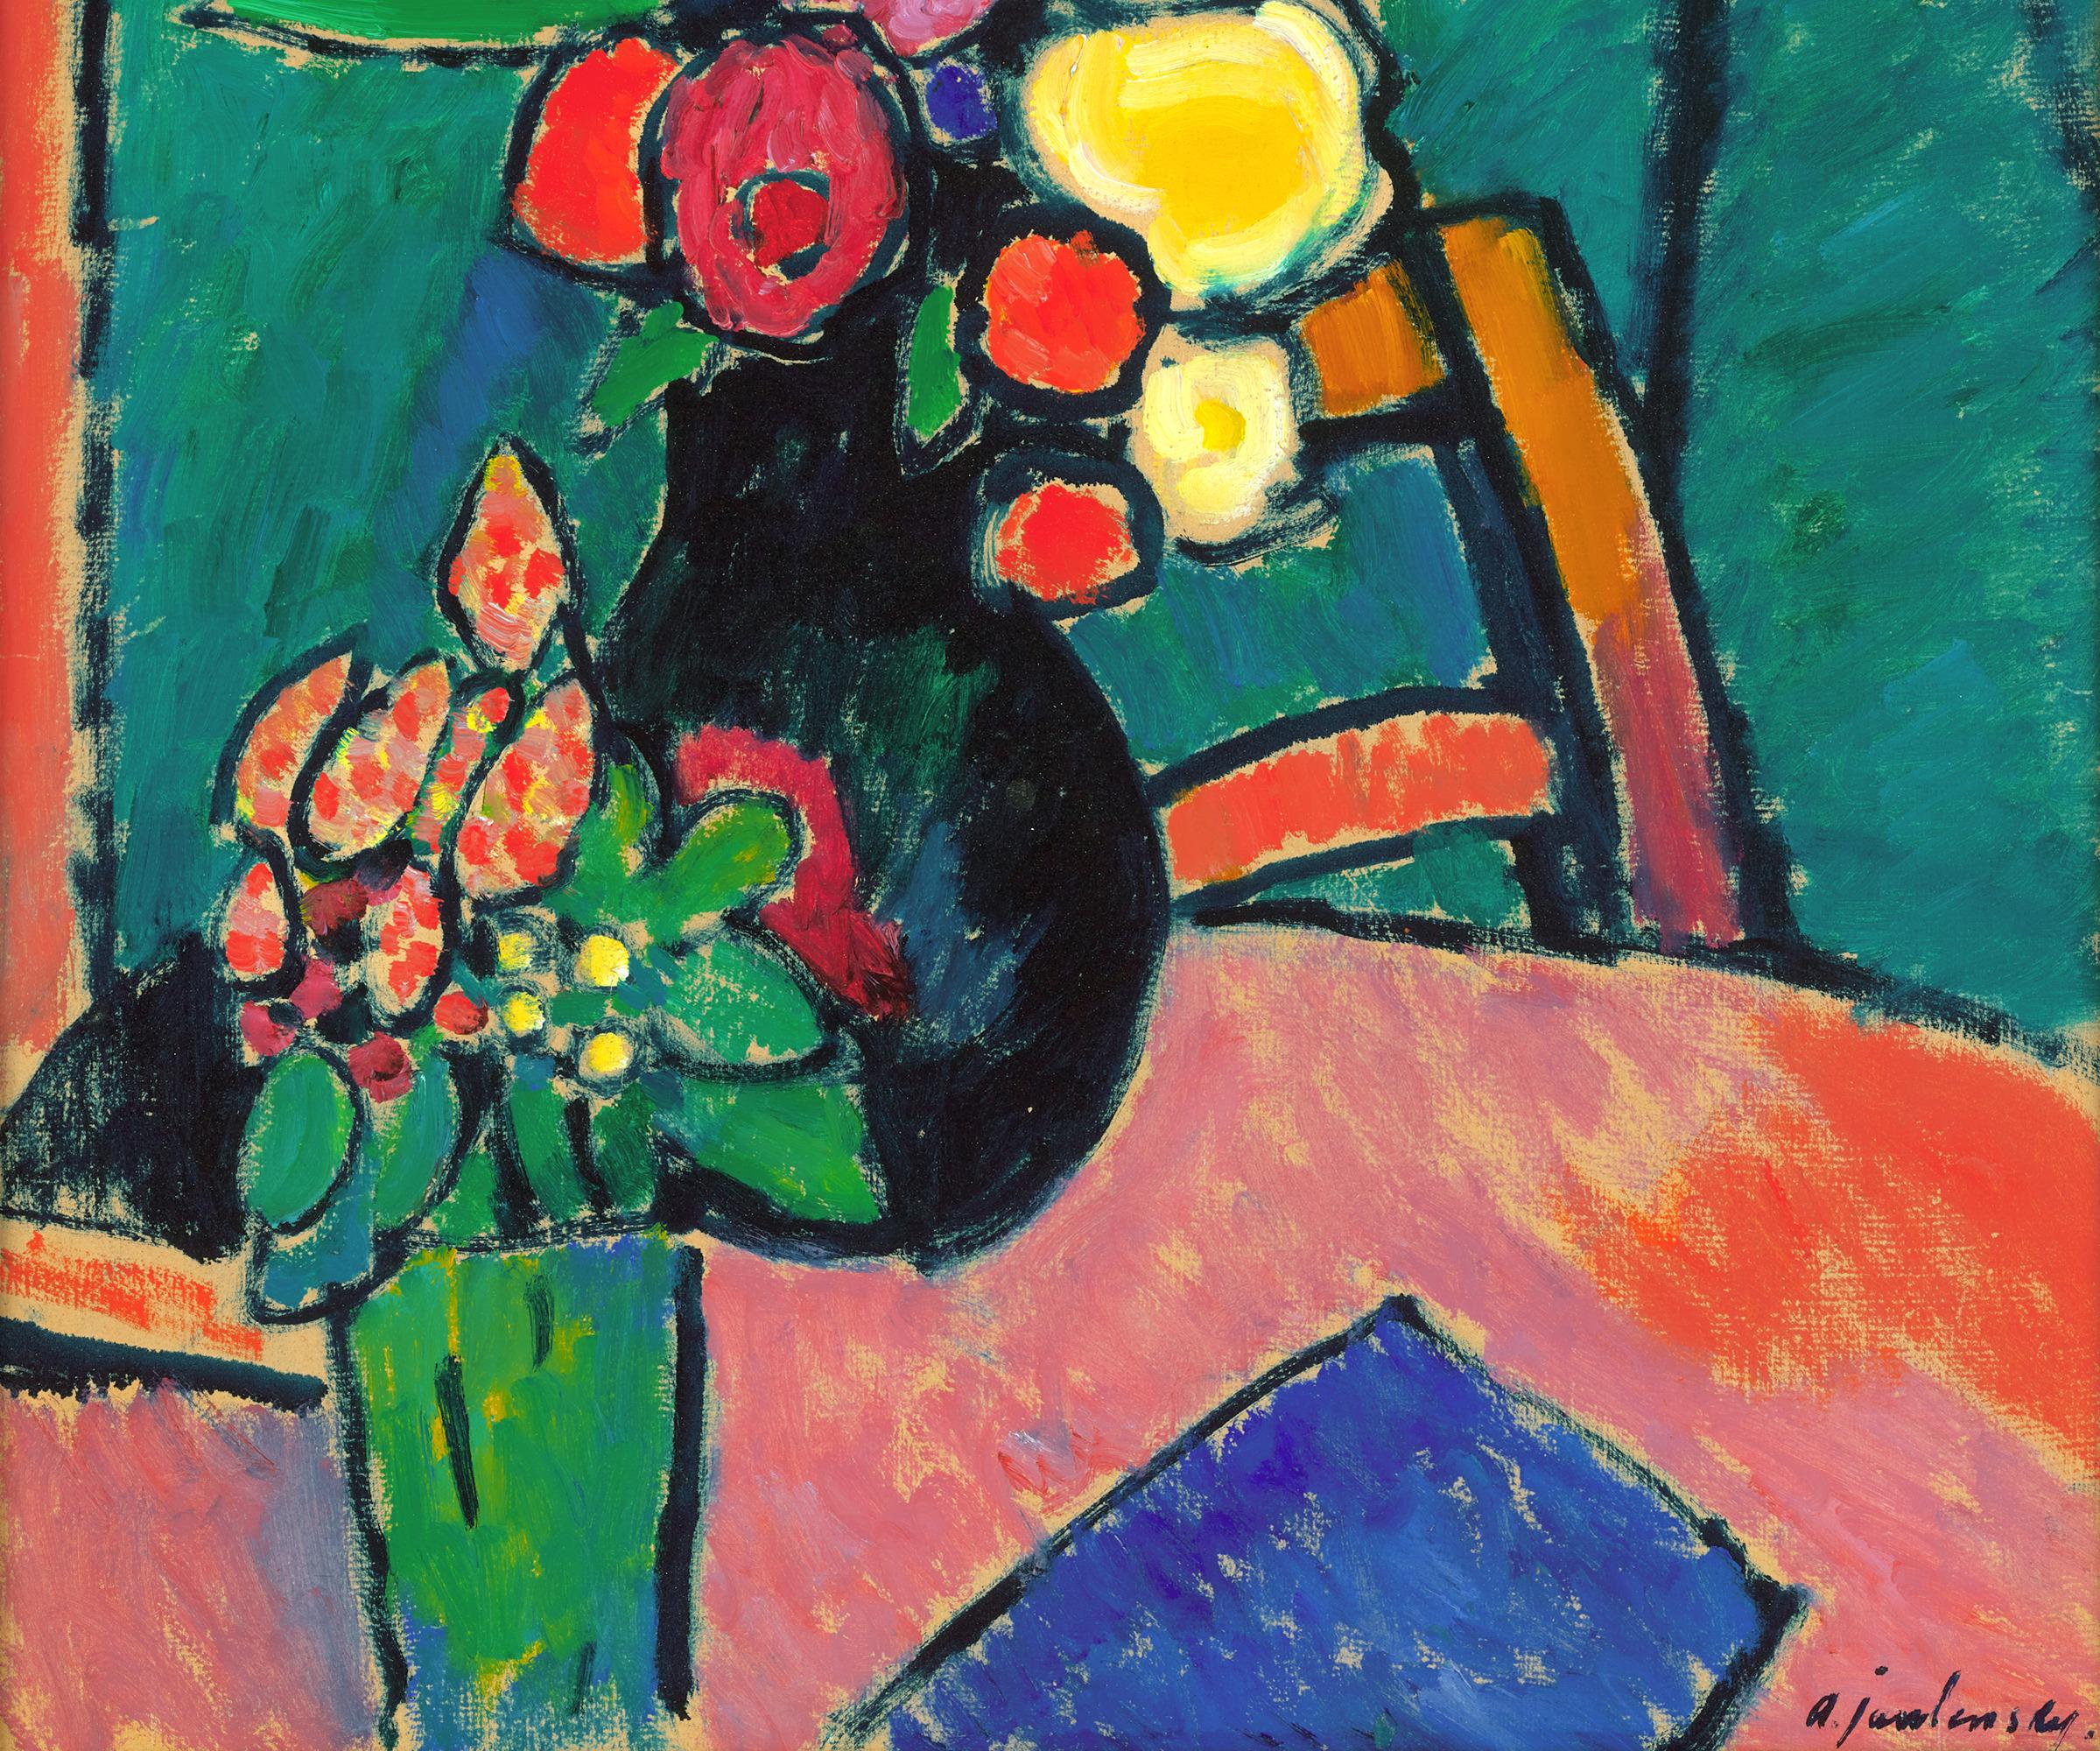 Alexej von Jawlensky
Russian  1864-1941

Blumenstilleben (Still Life with Flowers)

Signed ‘a. jawlensky.’ (lower right)
Oil on canvas board

This stunning floral still life is the work of esteemed Expressionist artist Alexej von Jawlensky. Fondly